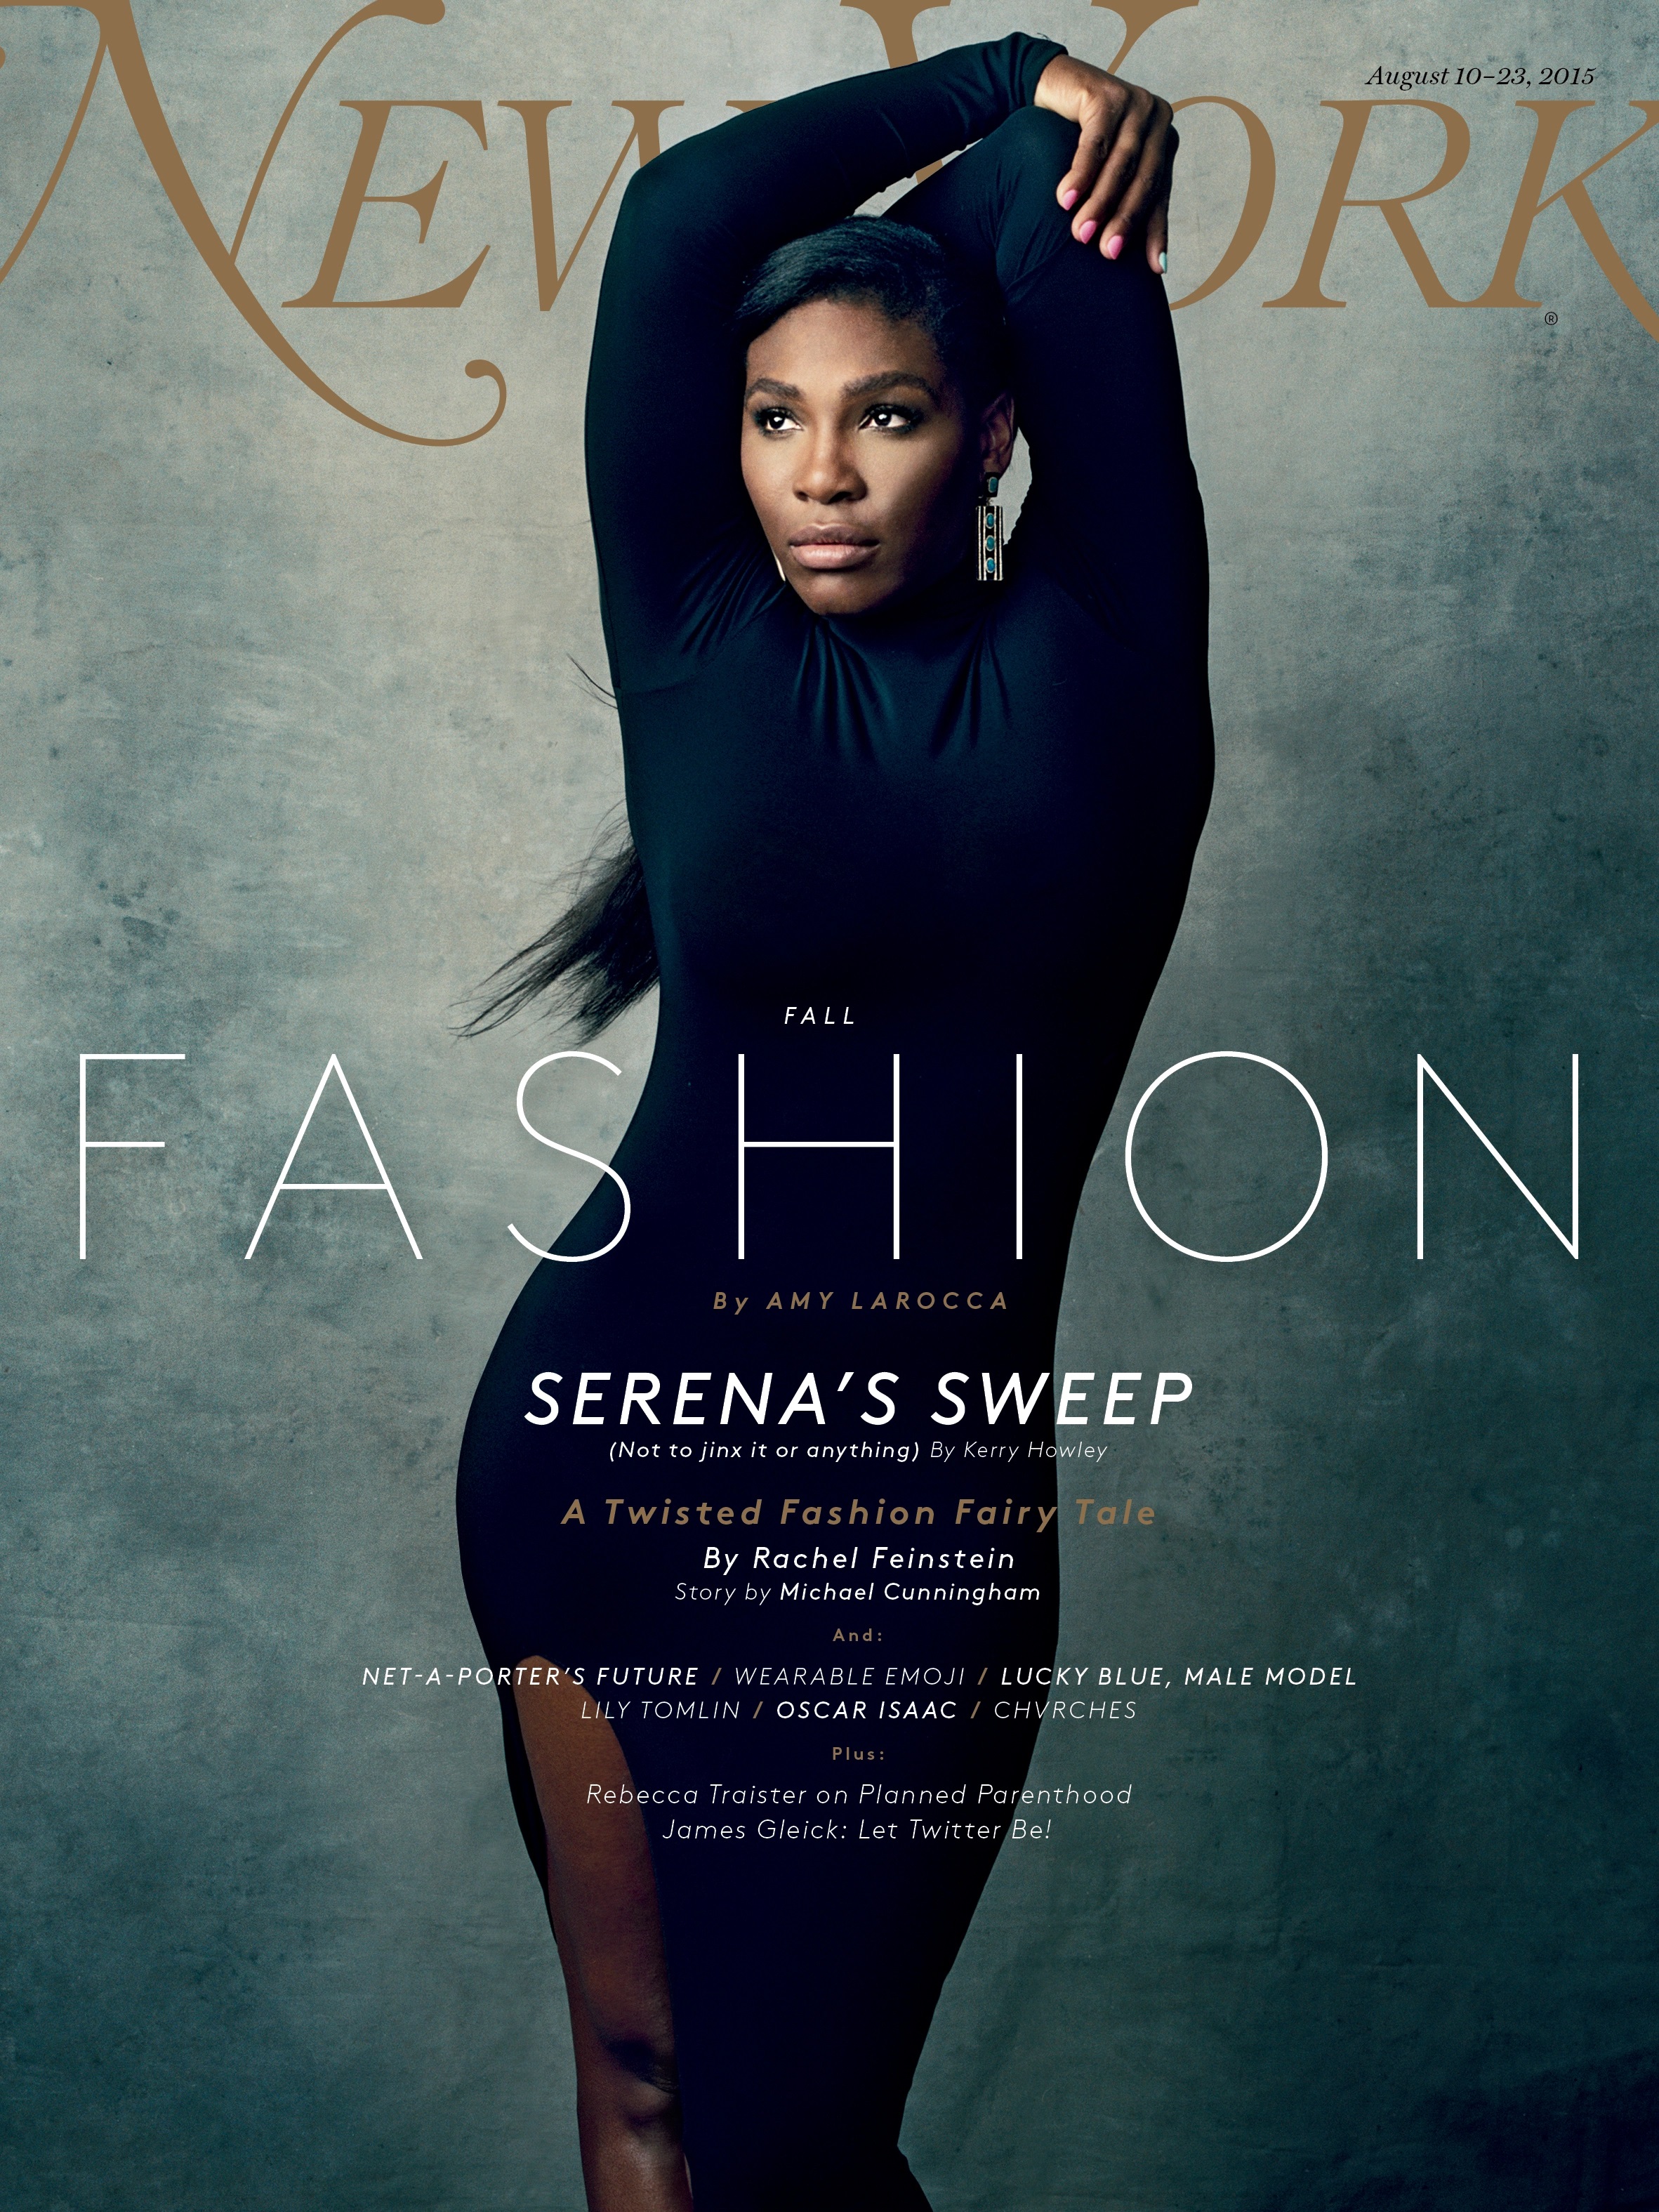 New York-"Serena's Sweep," August 10–23